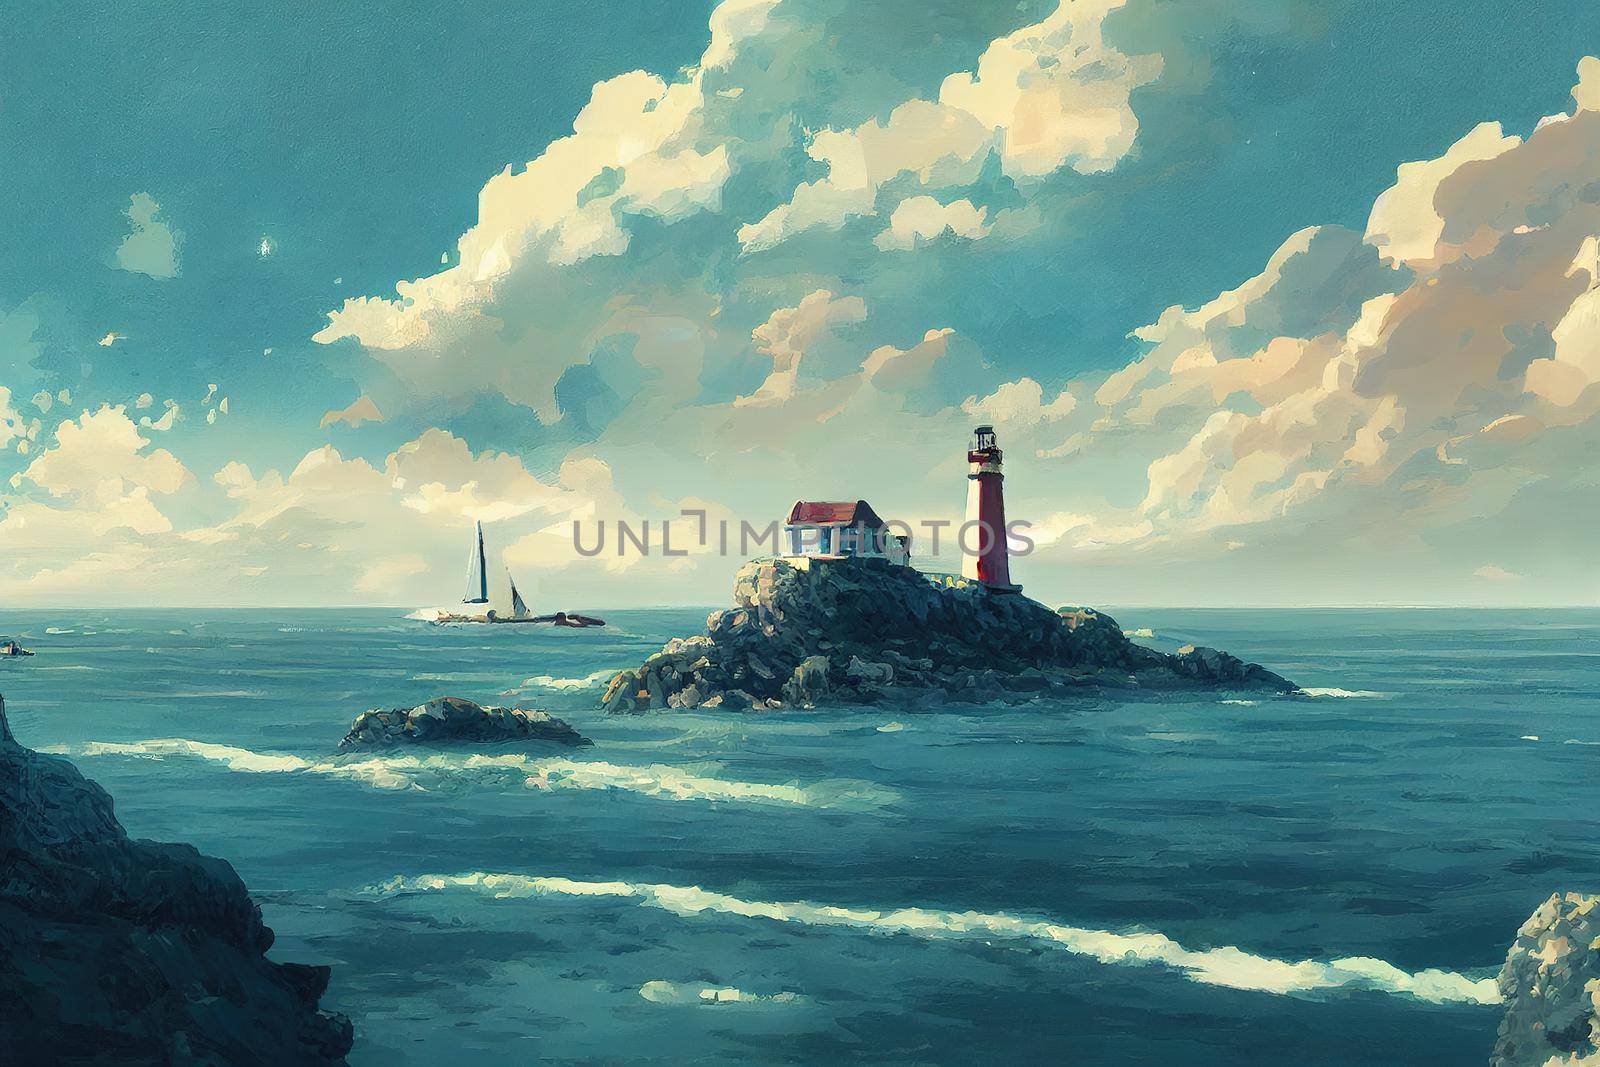 Landscape with blue sea, white sailboats, lighthouse and rock island by 2ragon